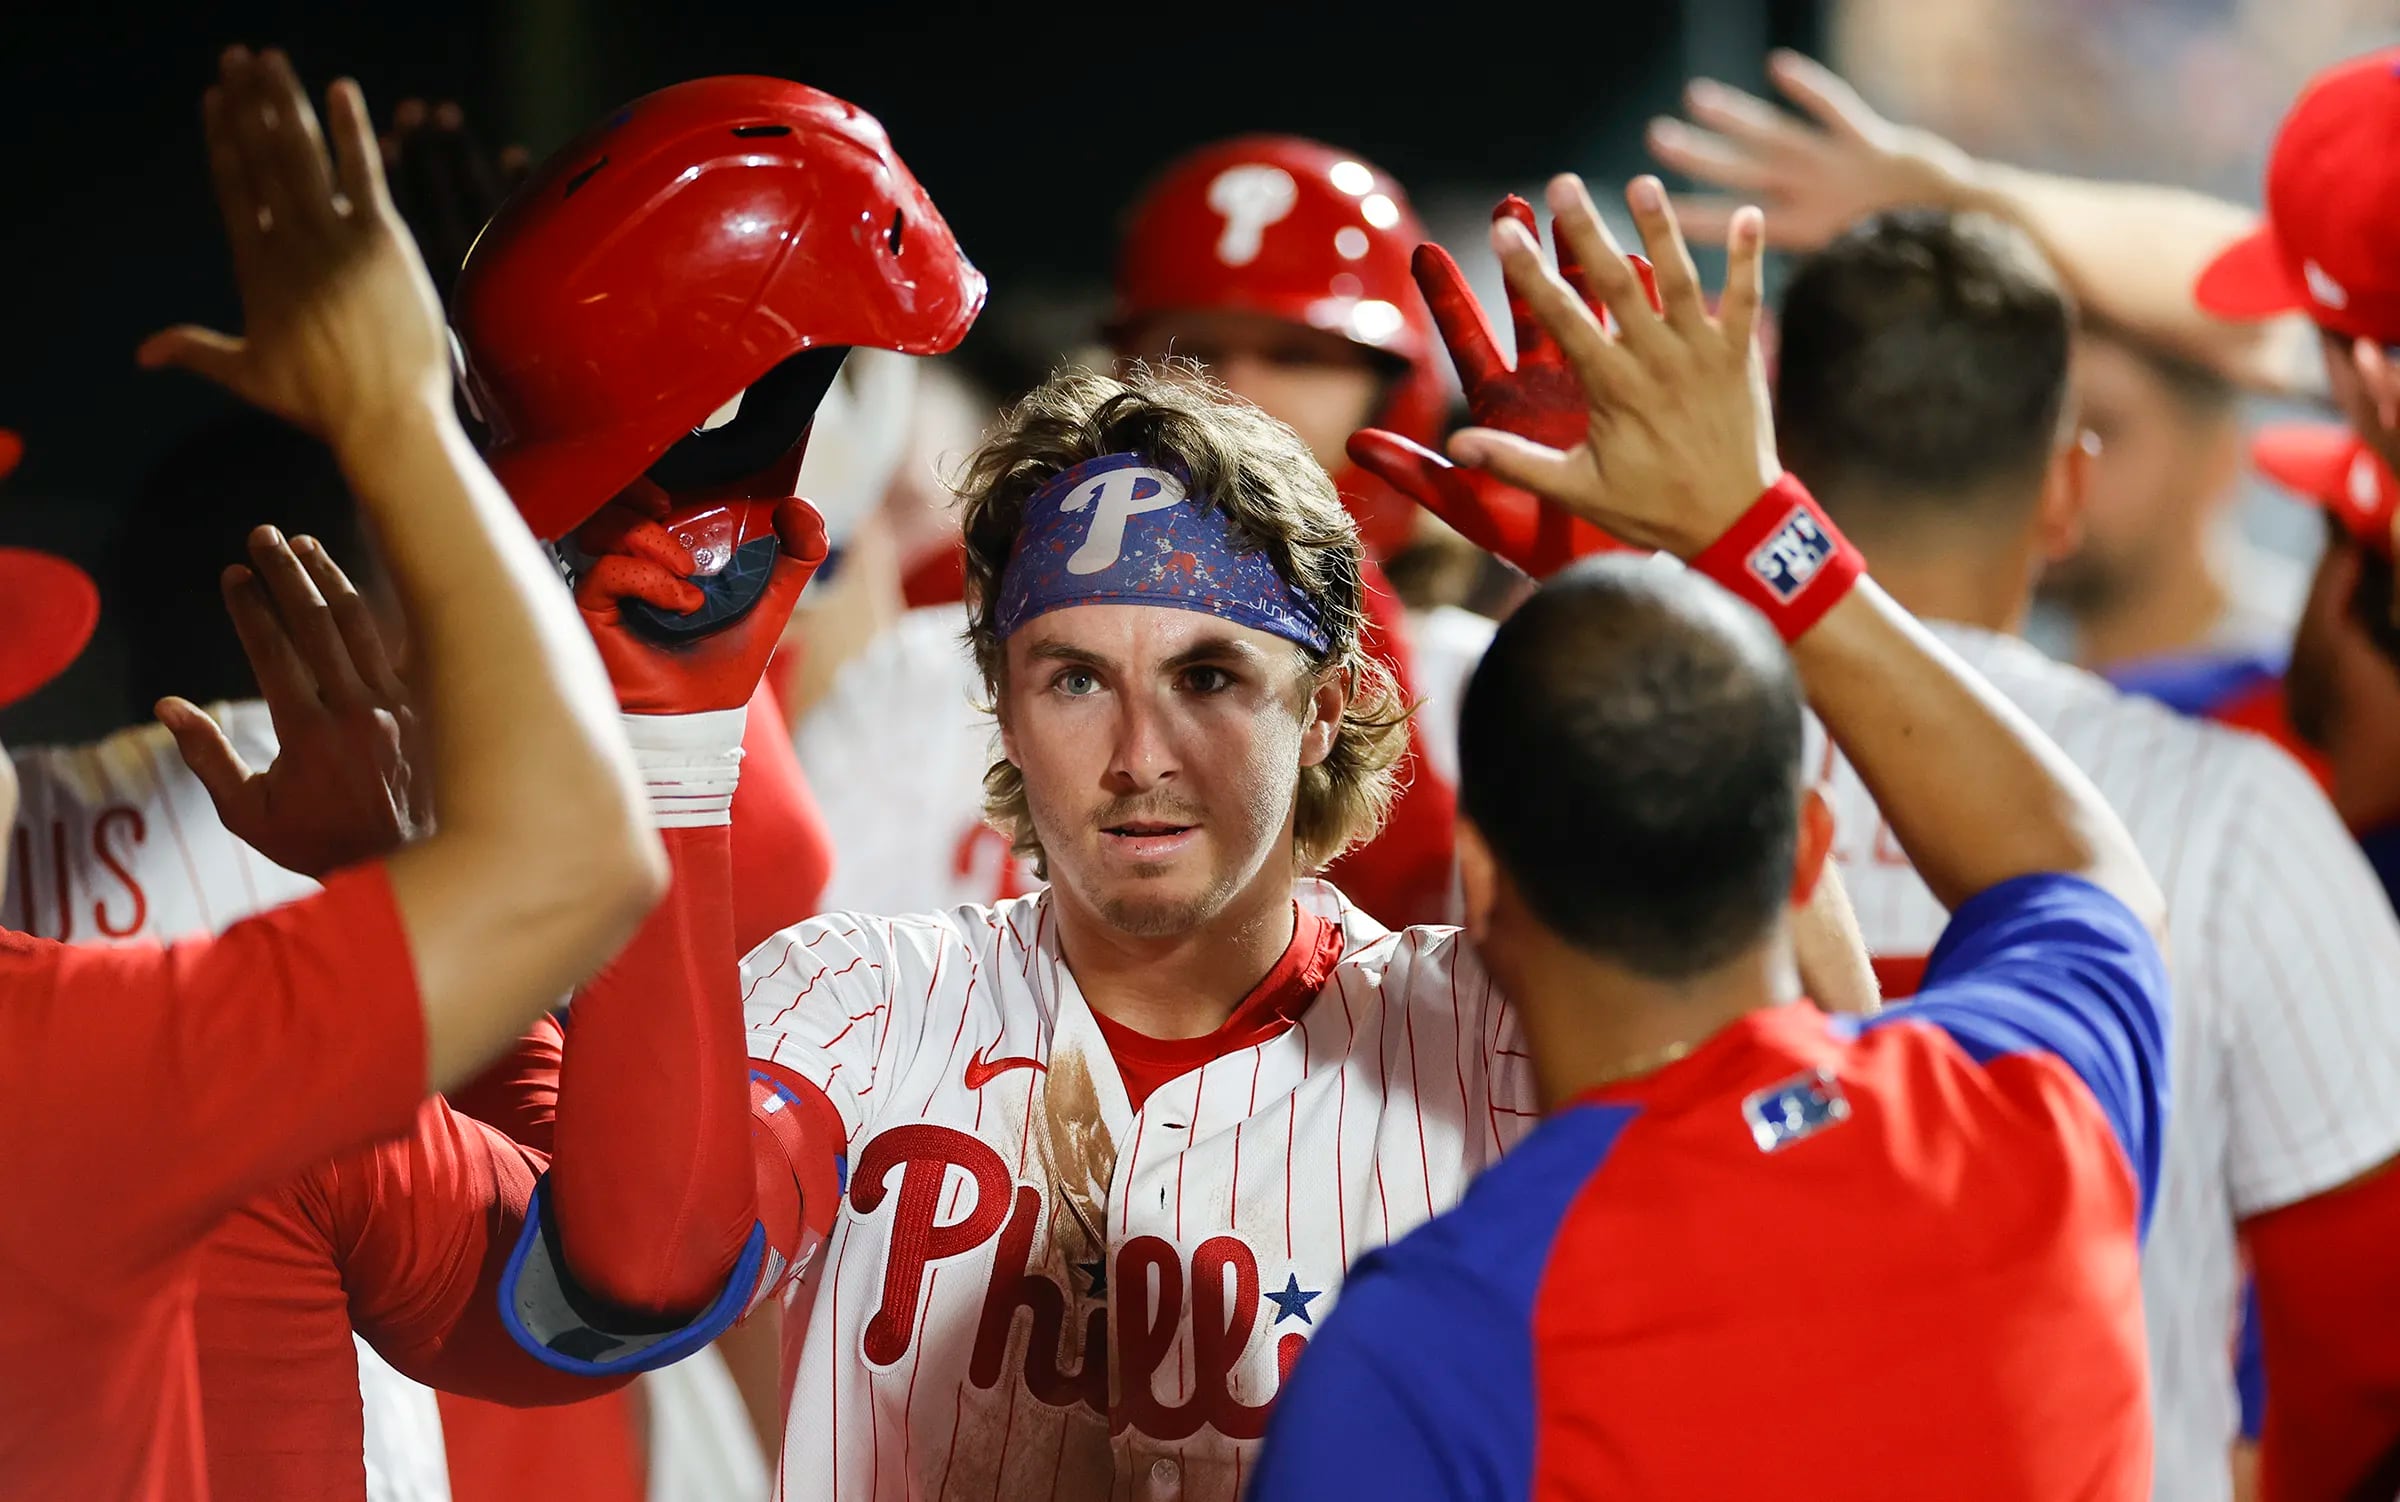 Bryson Stott doesn't skip a beat in Phillies' debut – Delco Times